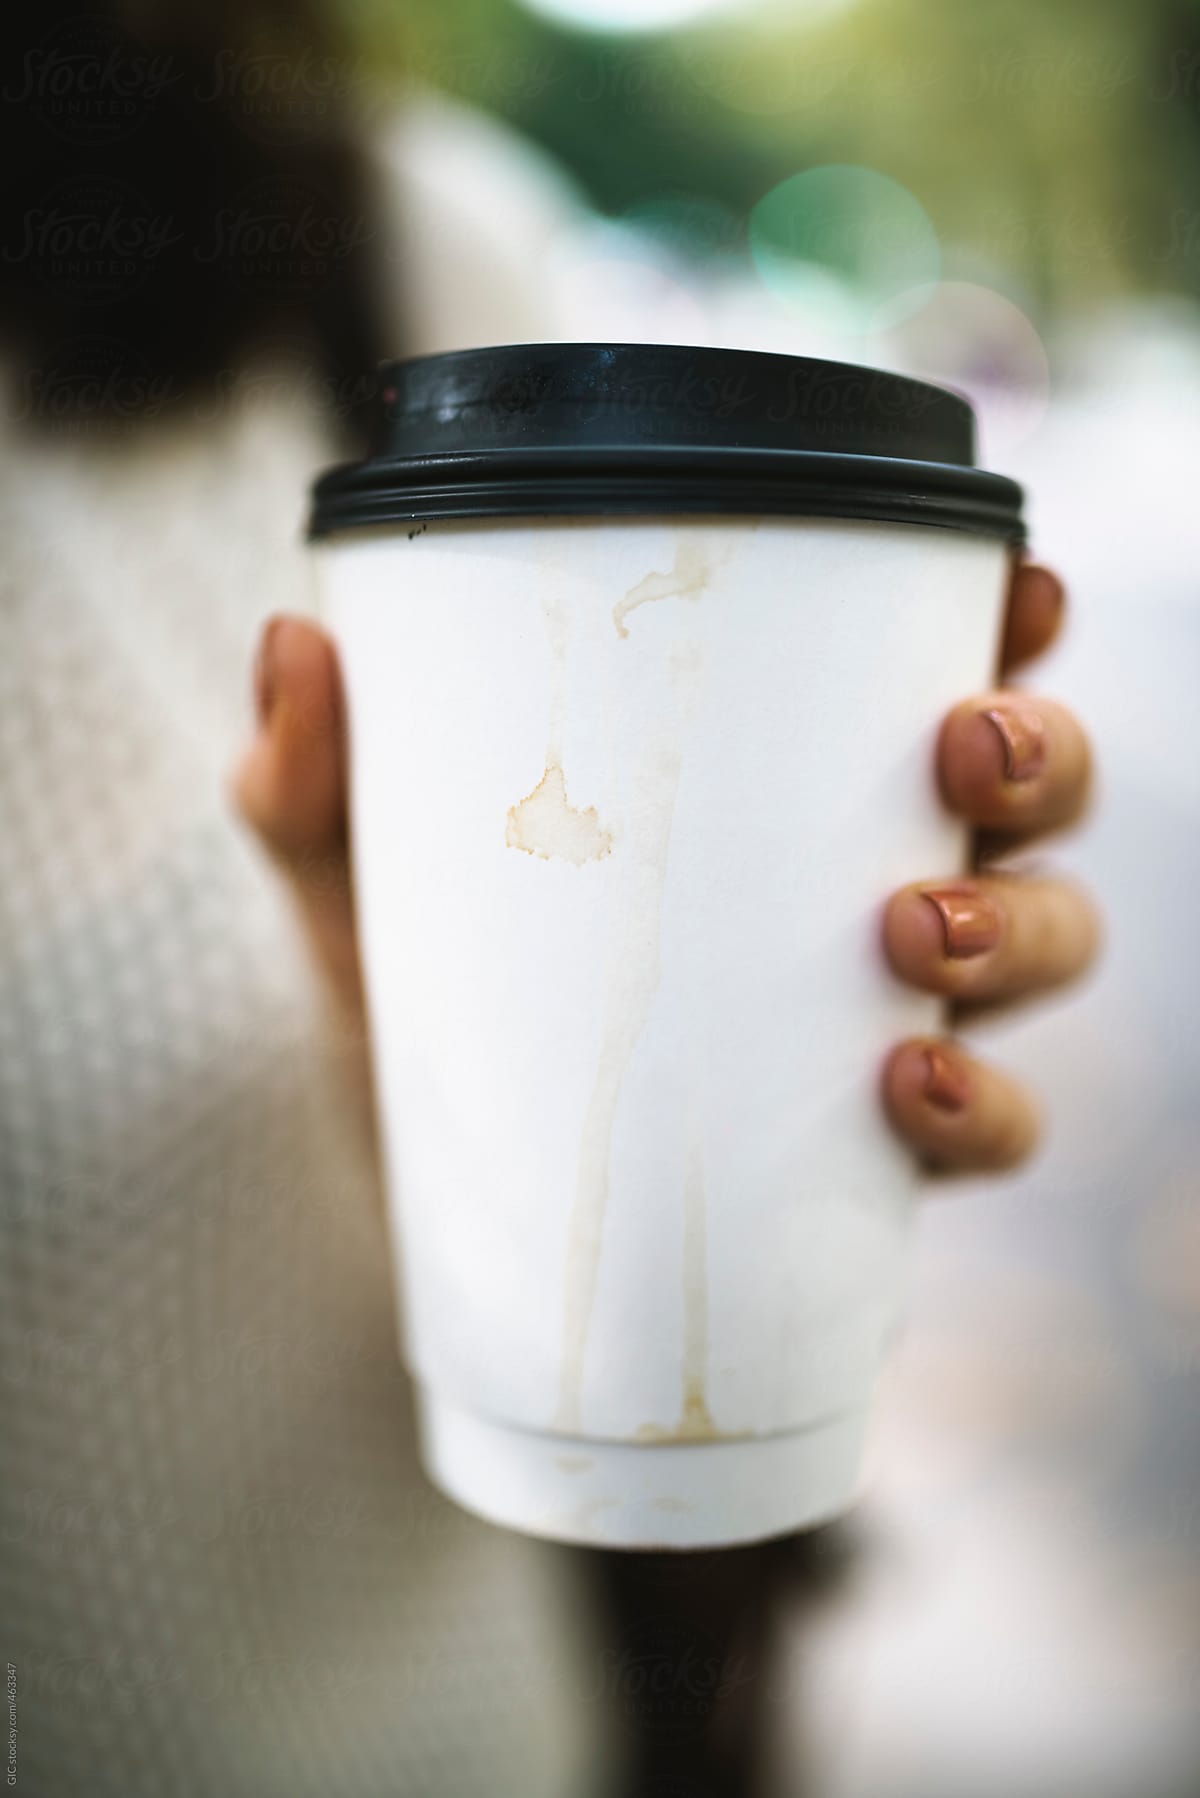 Hand holding a stained coffee cup